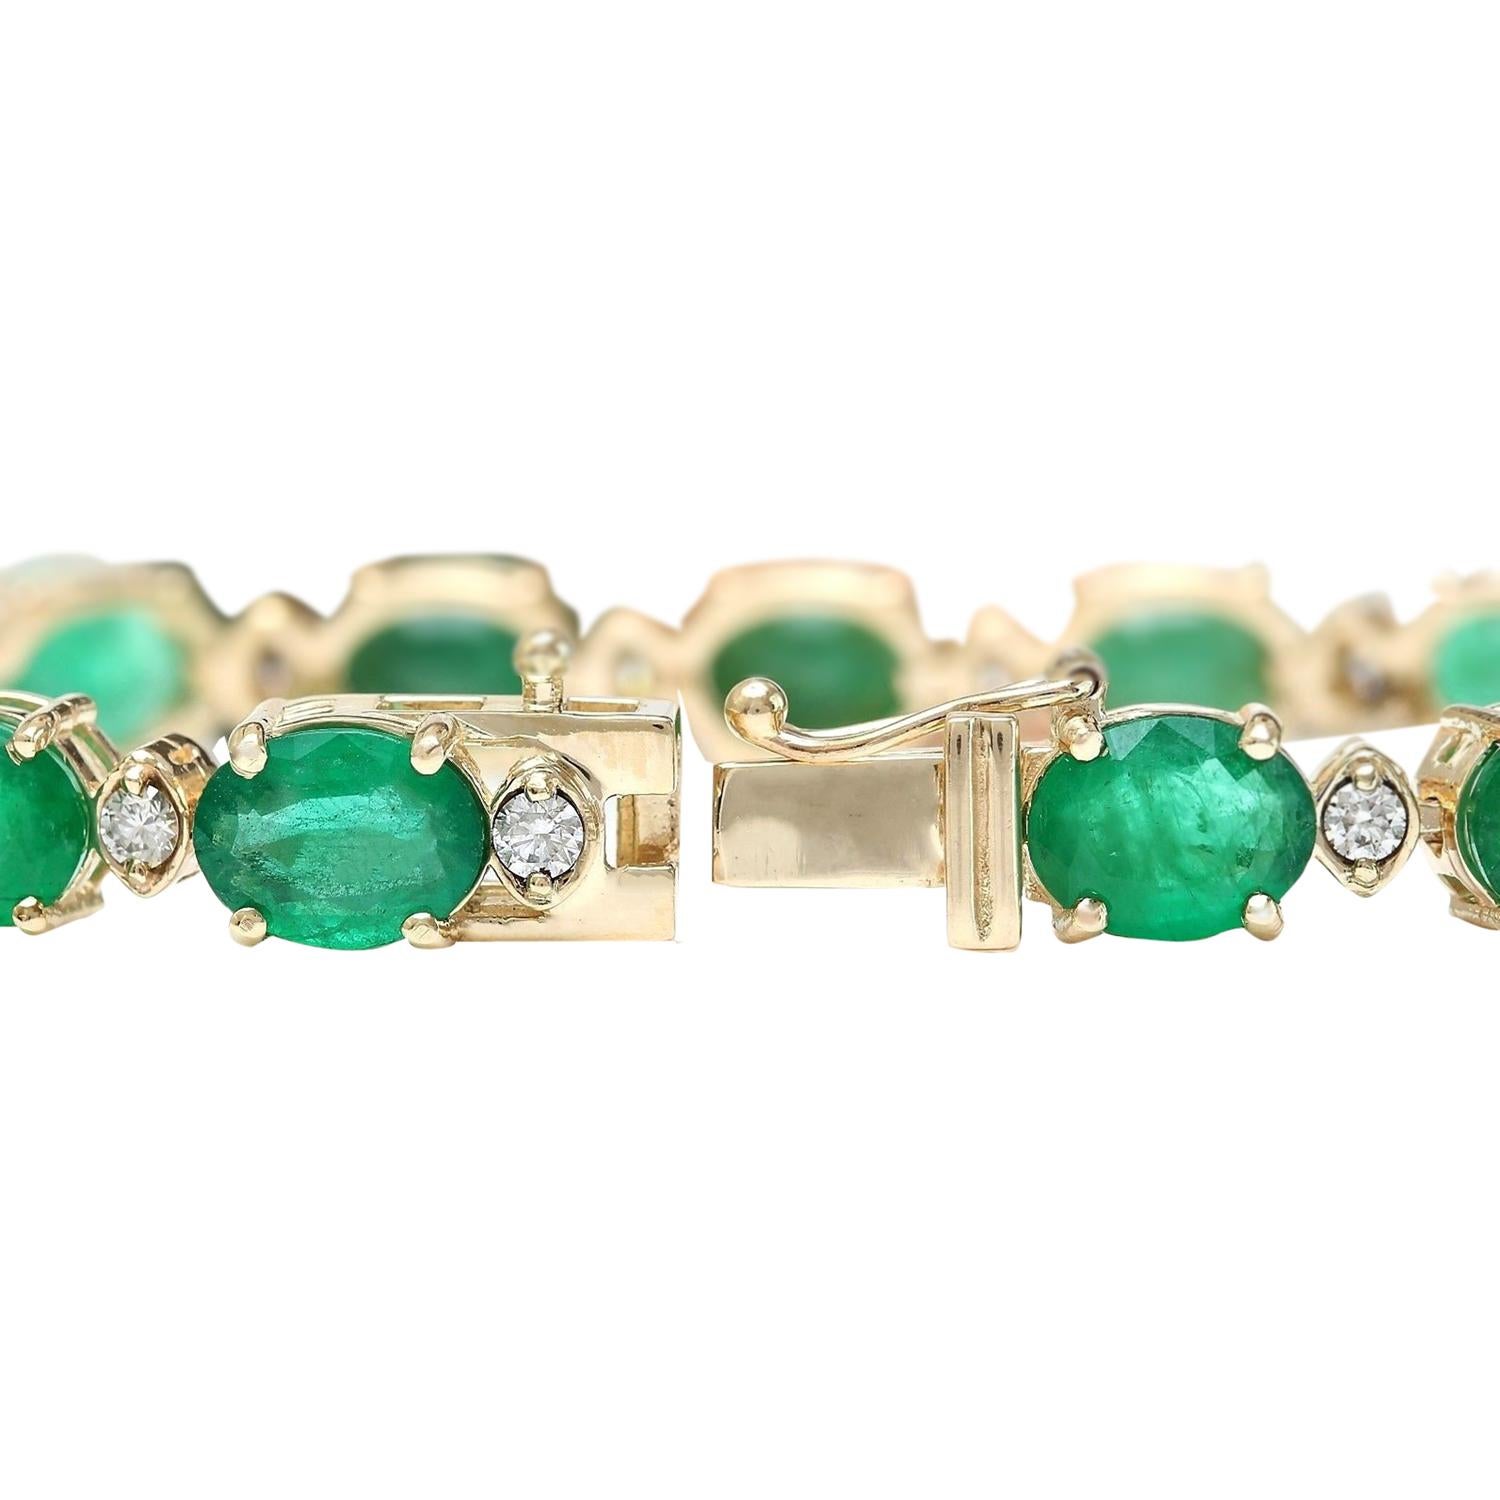 Introducing a breathtaking masterpiece of unparalleled elegance, this Emerald Diamond Bracelet exudes opulence and sophistication. Crafted in luxurious 14K Solid Yellow Gold, this bracelet boasts a remarkable 27.98 carats of radiant beauty.

At its